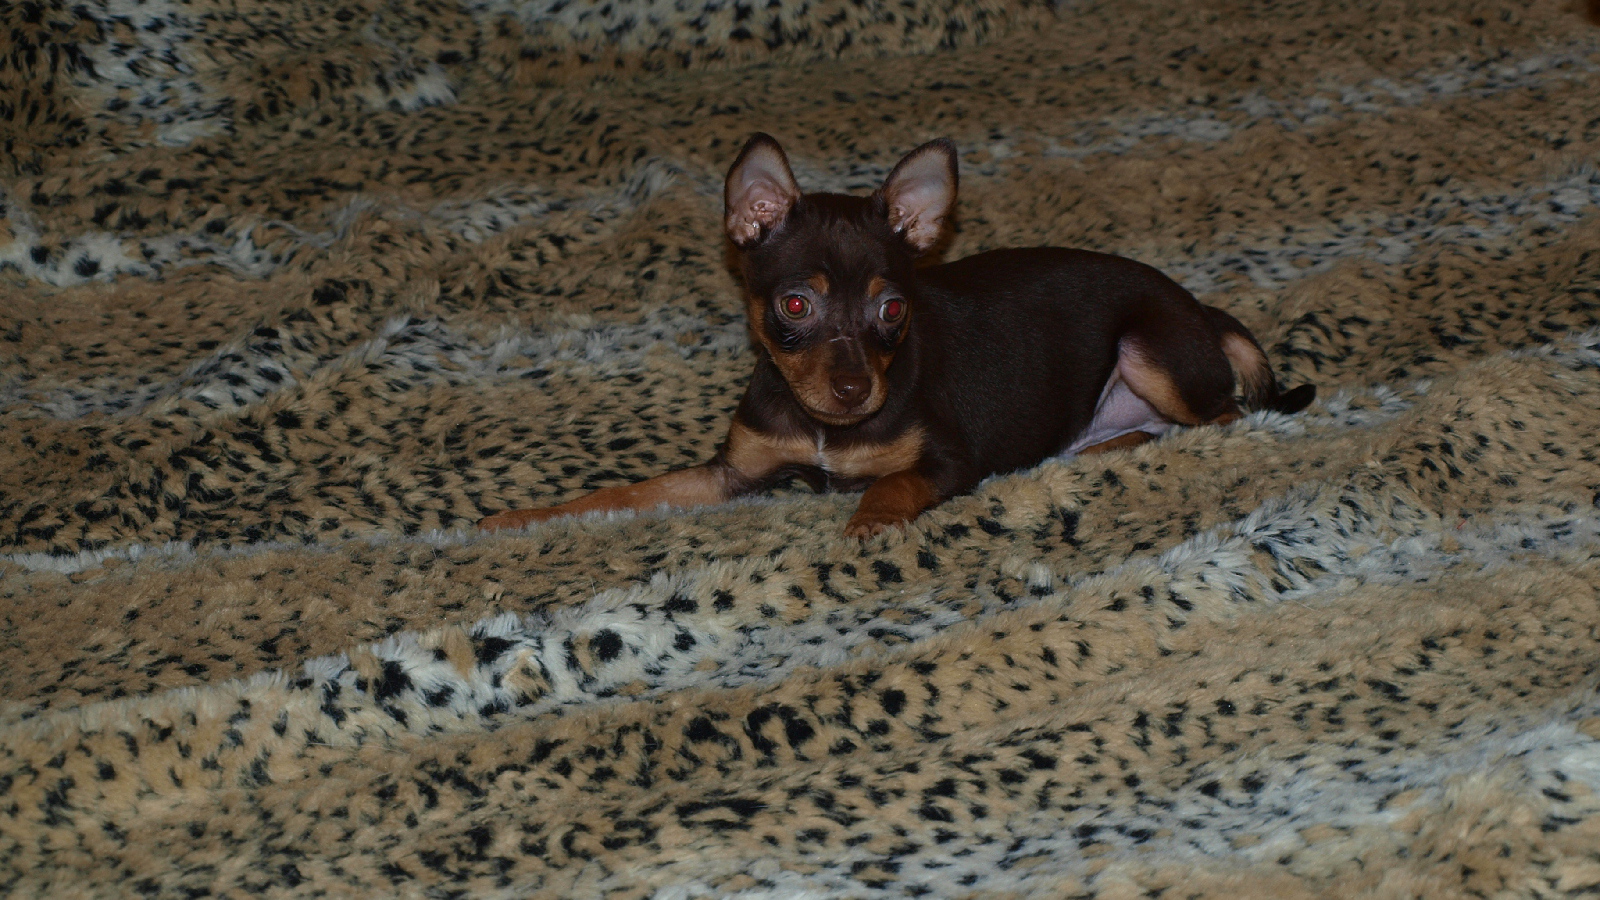 Baby Miniature Pinscher on the bed